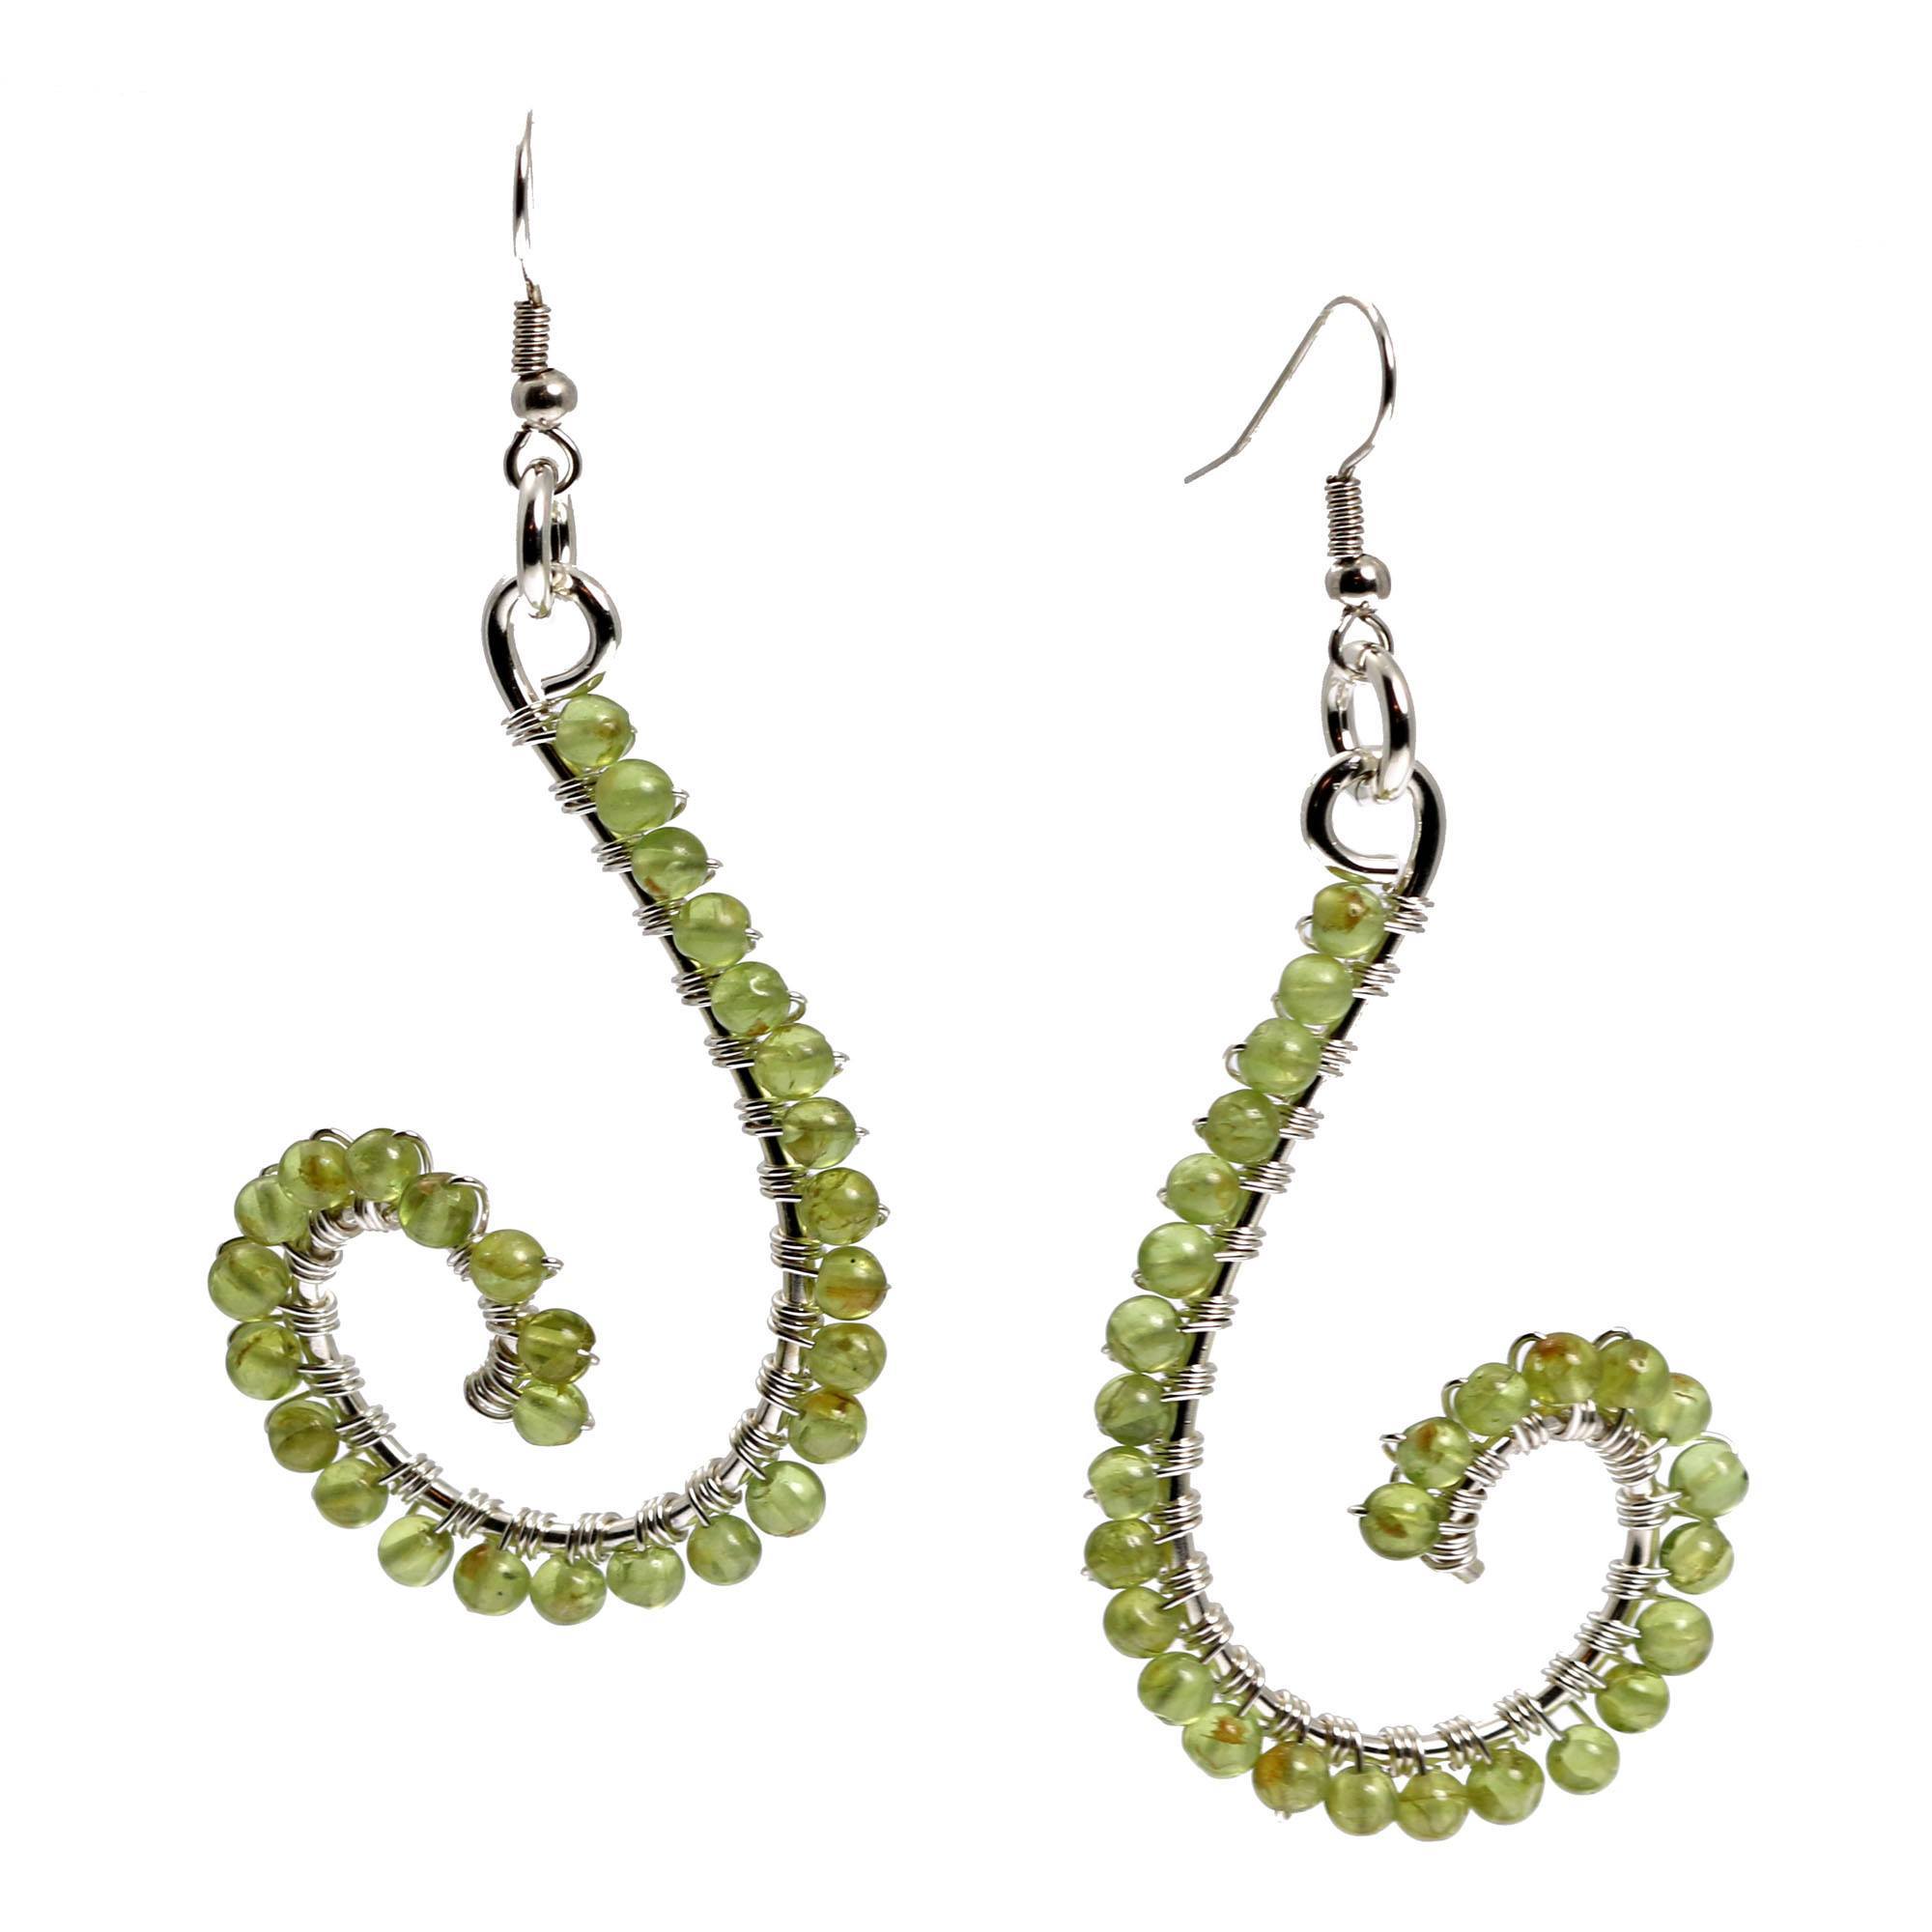 Detail View of Peridot Wire Wrapped Silver Scroll Earrings